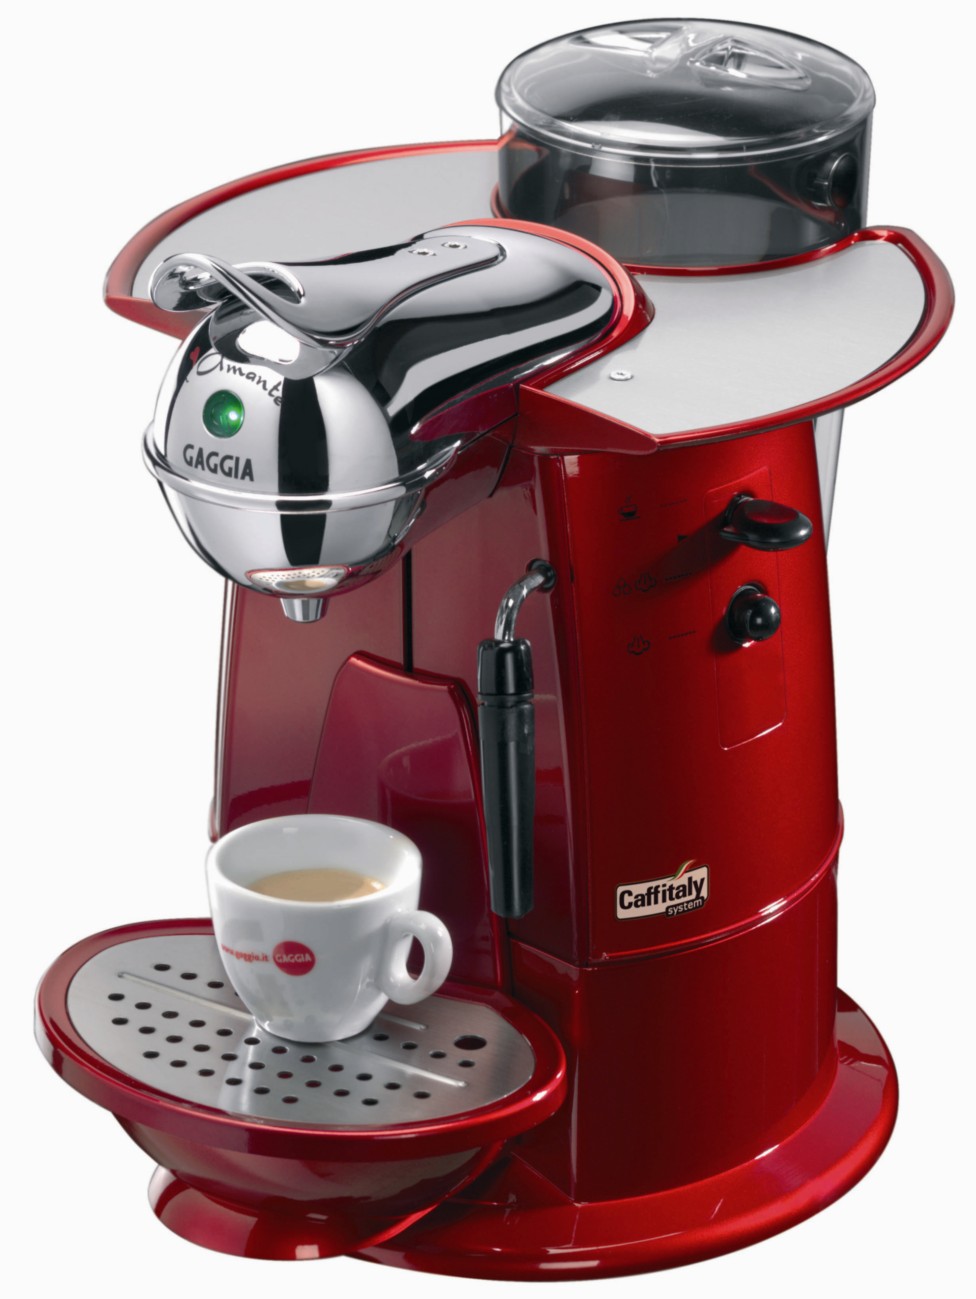 Gaggia LAmante Caffitaly Red